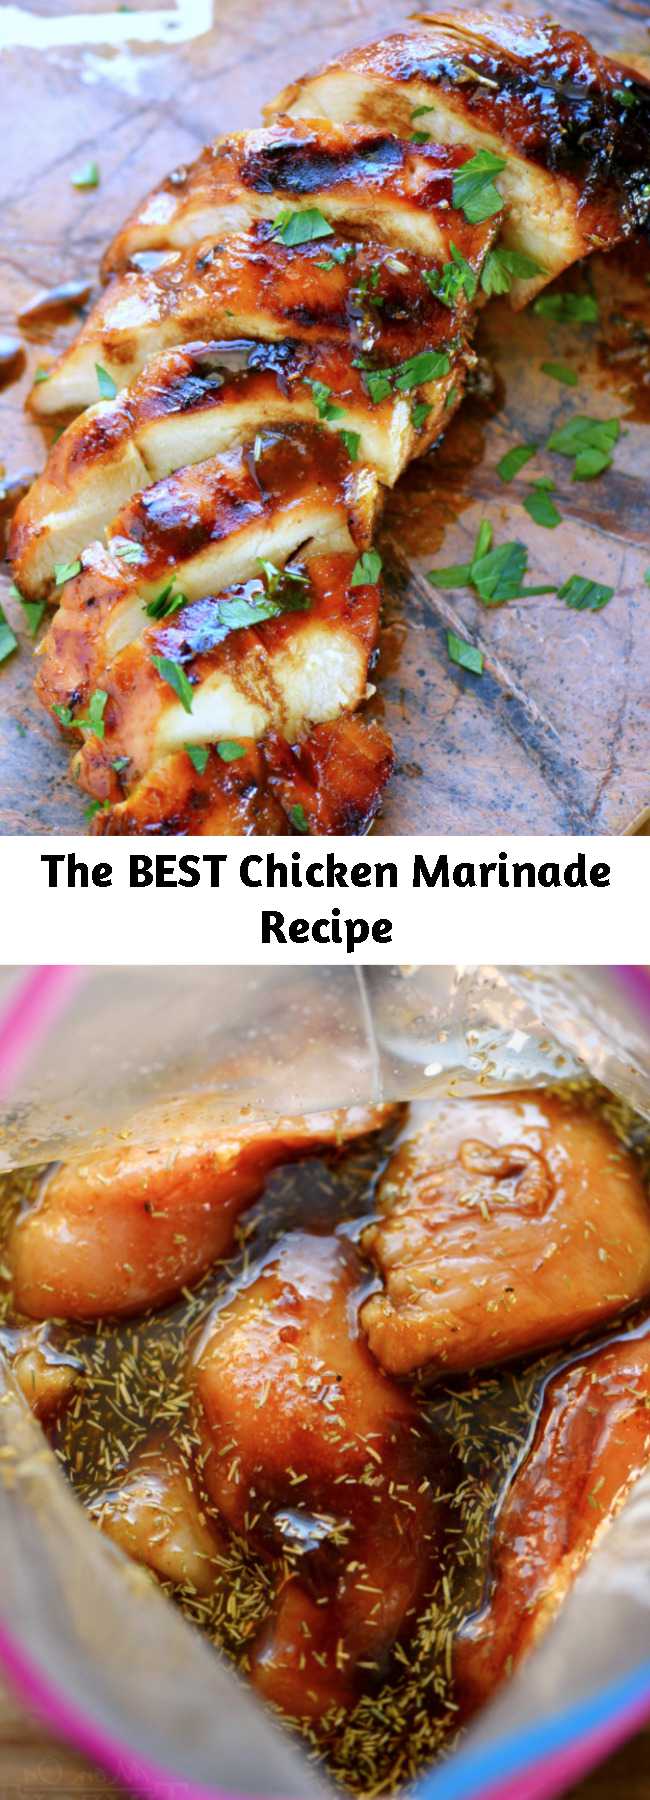 The BEST Chicken Marinade Recipe - Look no further for the Best Chicken Marinade recipe ever! This easy chicken marinade recipe is going to quickly become your favorite go-to marinade! This marinade produces so much flavor and keeps the chicken incredibly moist and outrageously delicious - try it today!